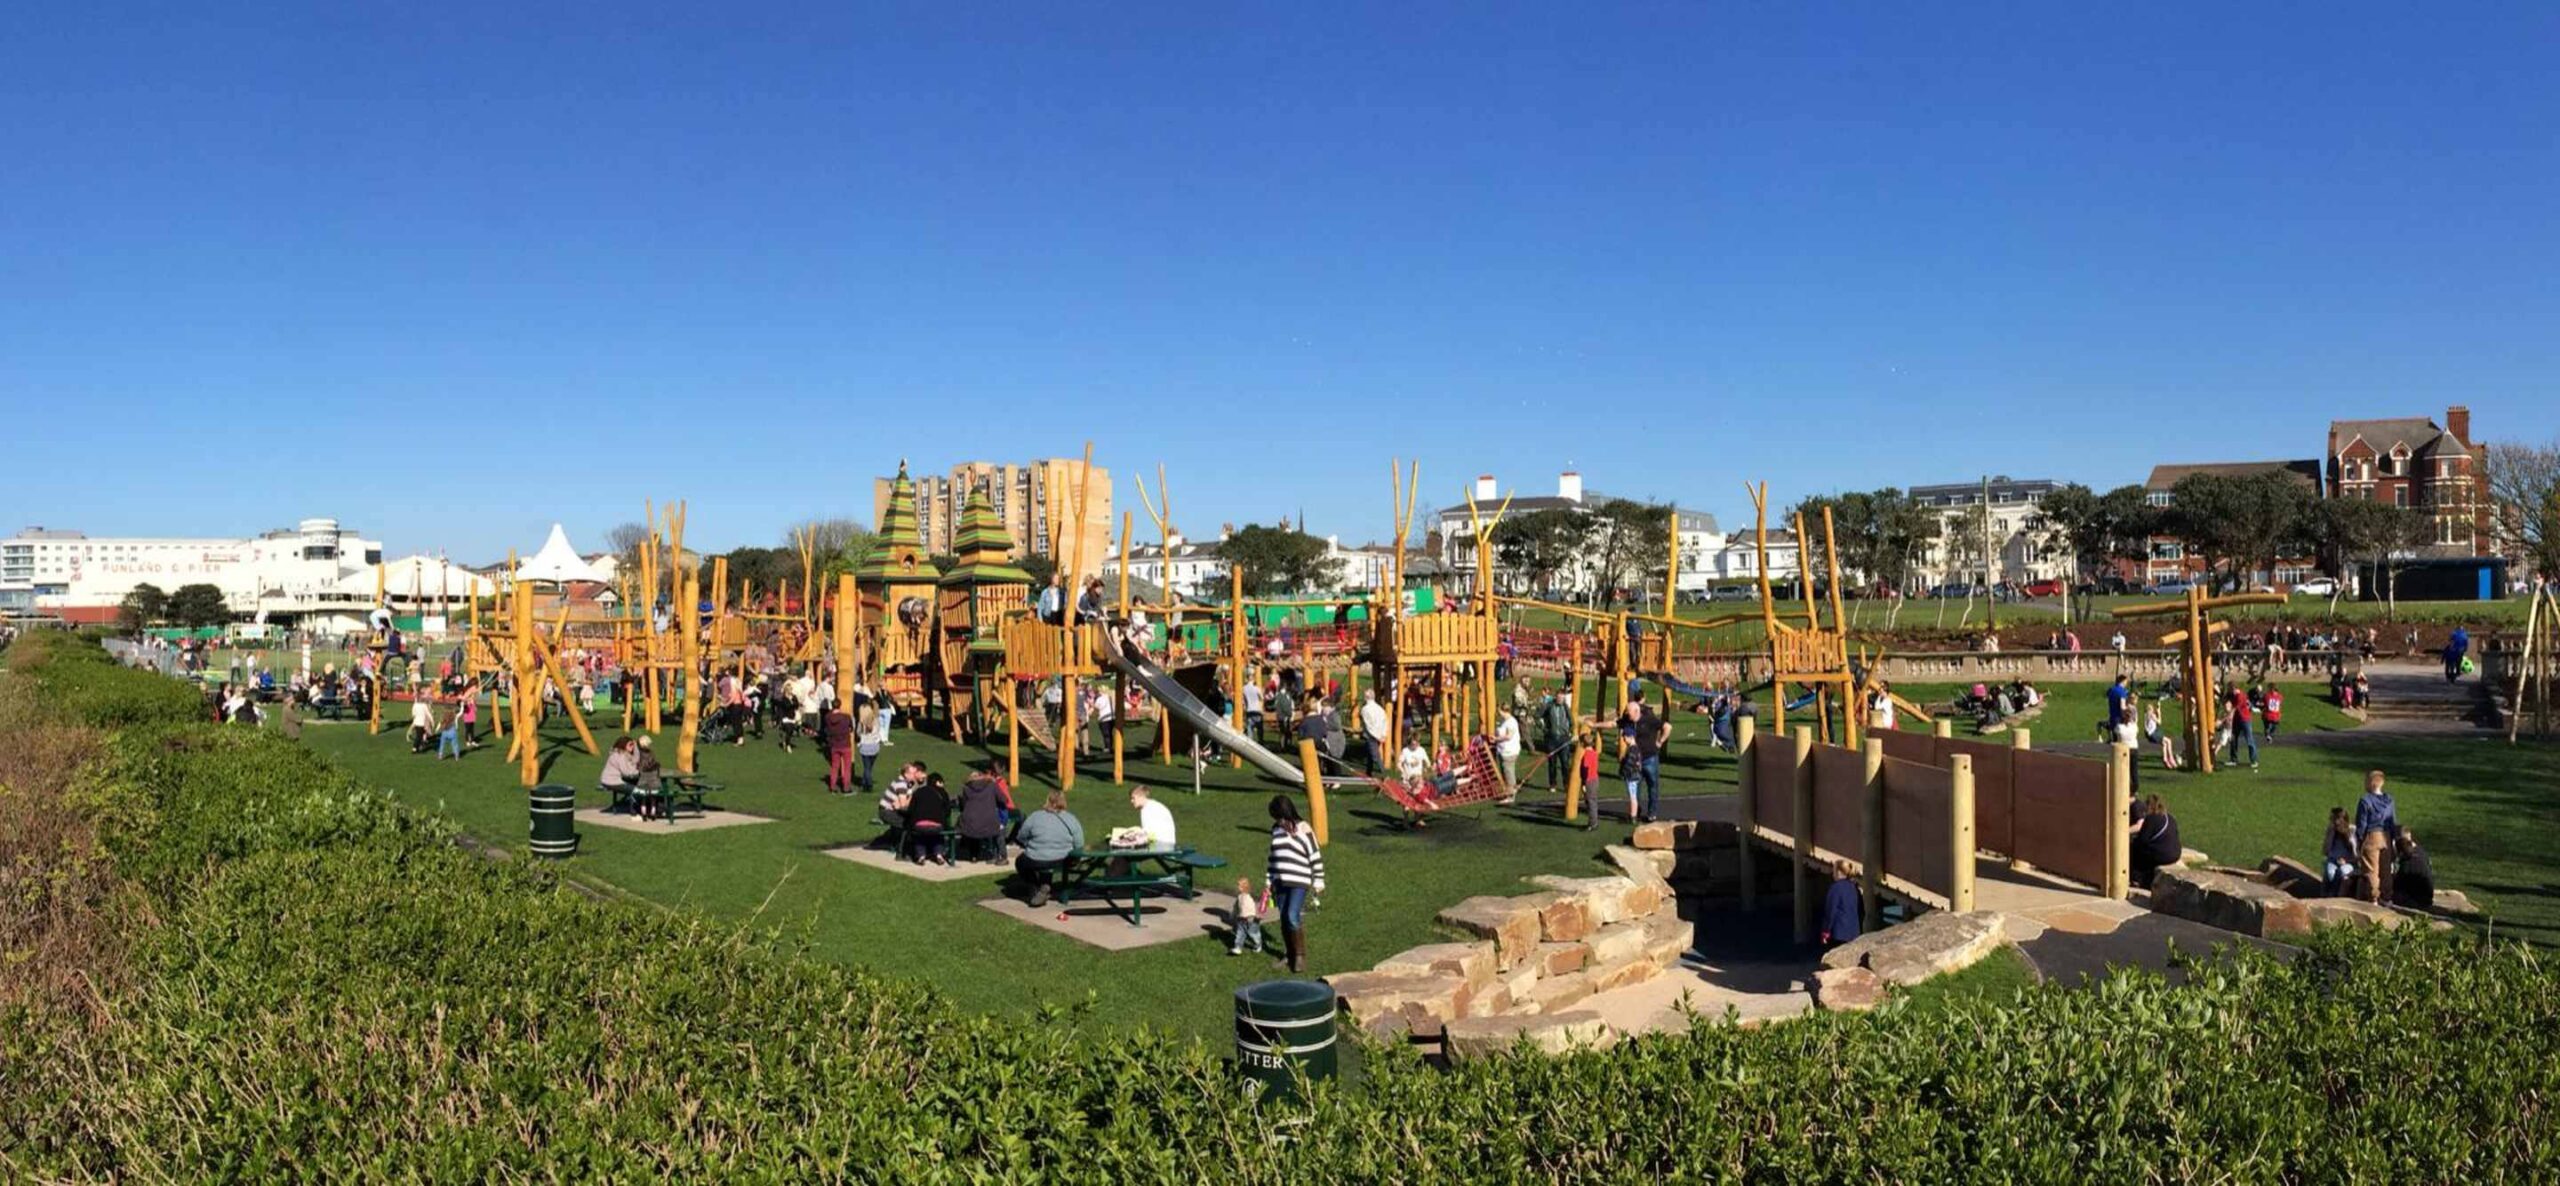 The playground at Kings Gardens in Southport 